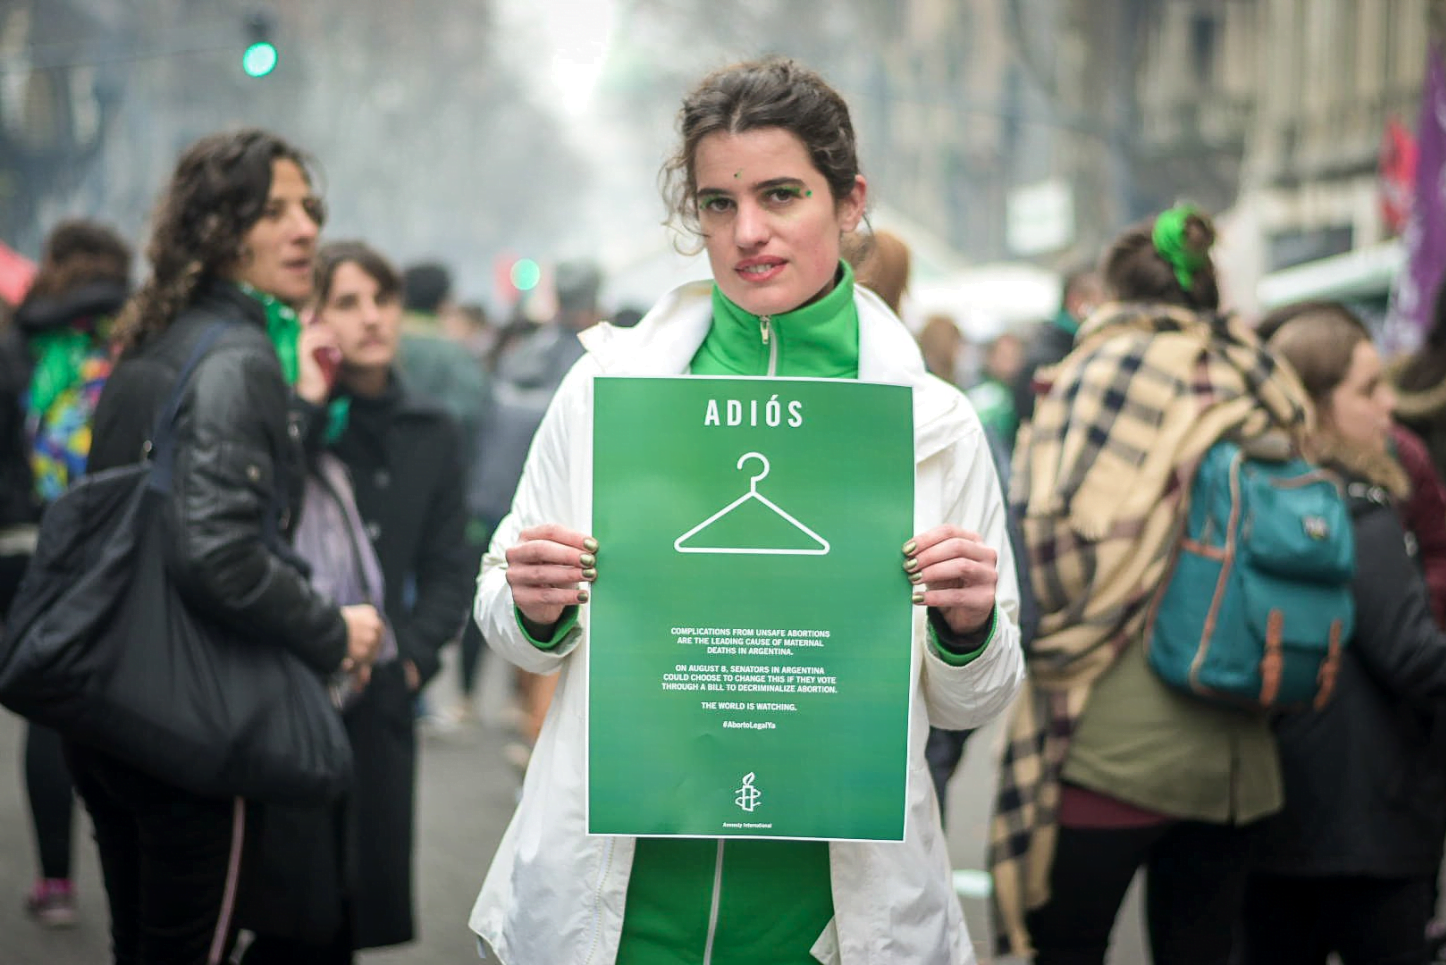 A woman wearing green and white holds a sign at an Argentinian protest calling for reproductive rights. The sign reads 'Adios' and has an image of a coathanger.